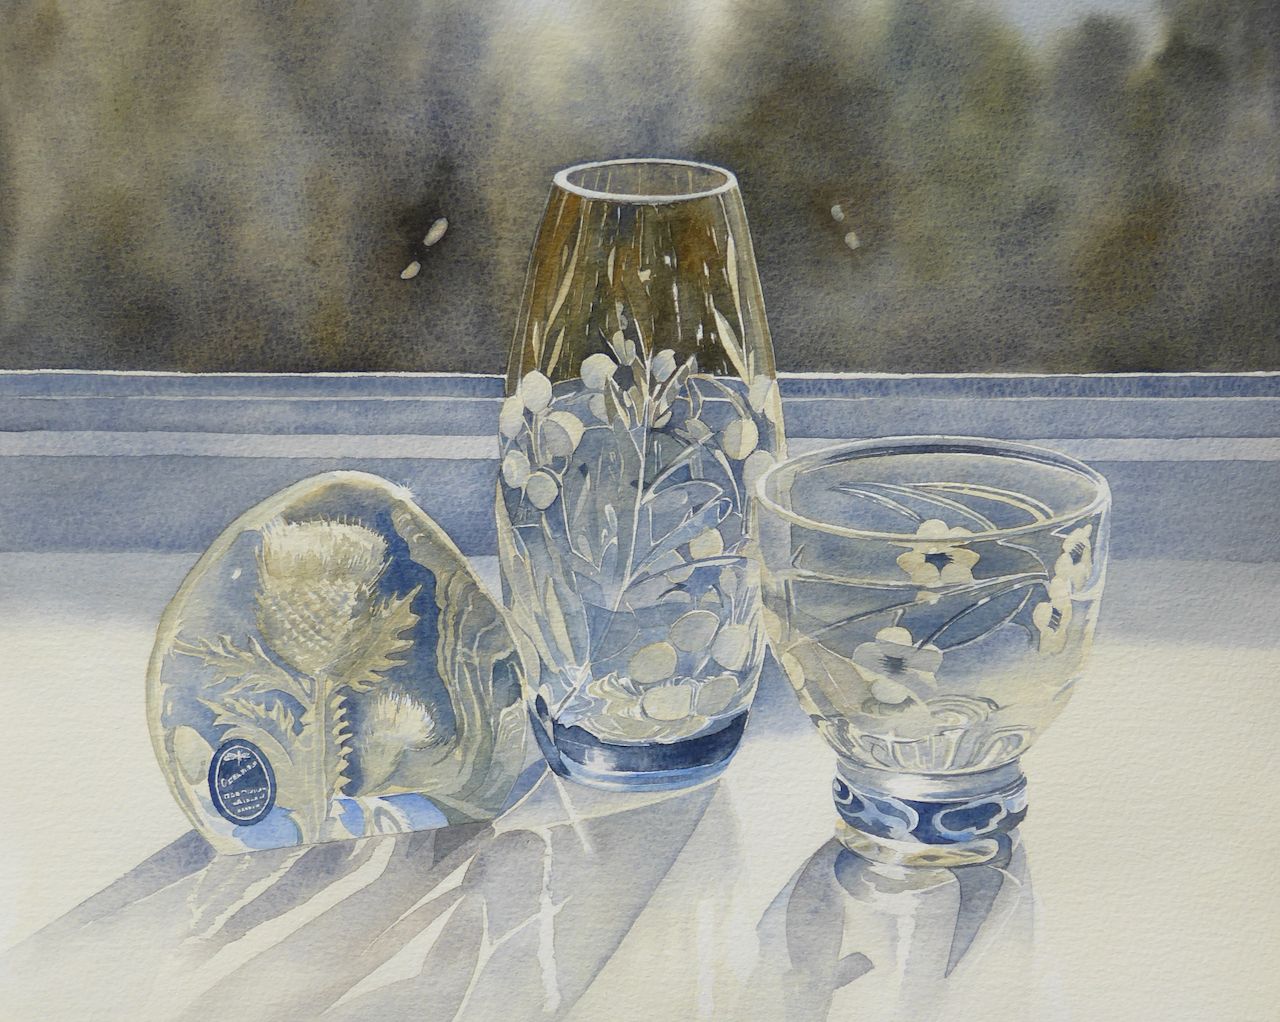 “Sunlight glass at the window” a watercolour painting of light reflecting through glass objects by Lesley Linley using A J Ludlow Professional Watercolour